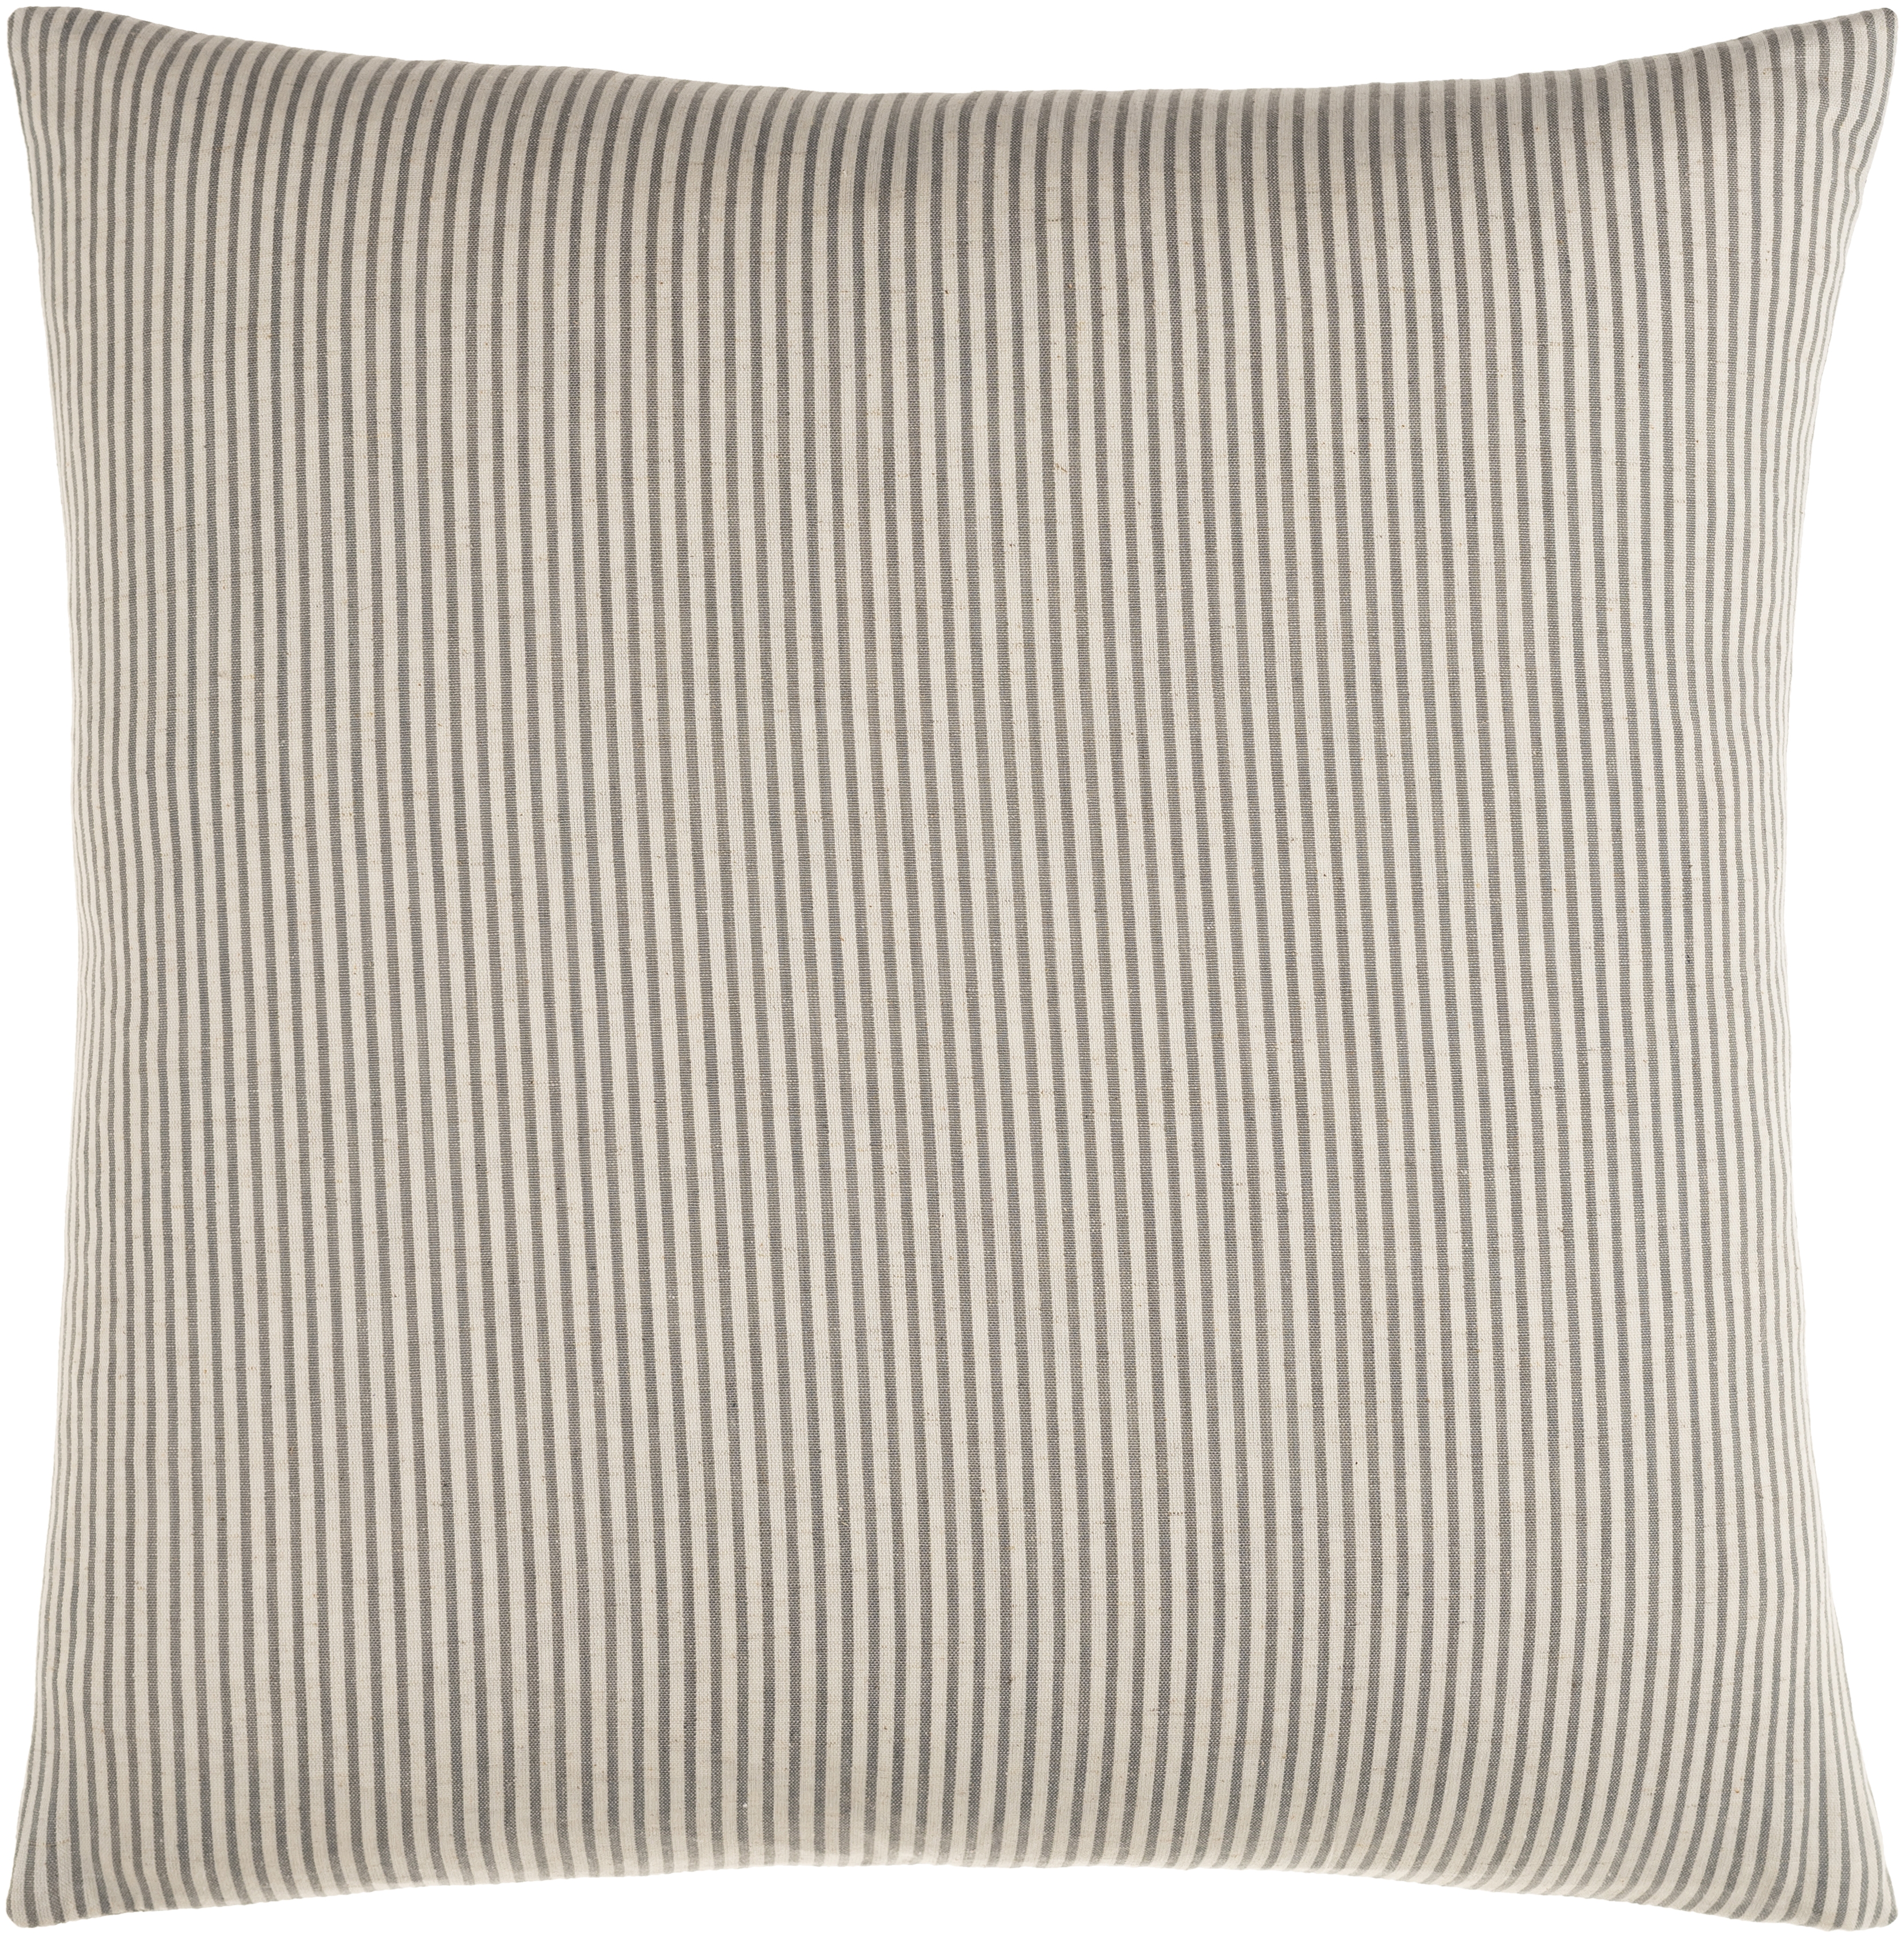 Skinny Stripe Throw Pillow, 18" x 18", pillow cover only - Image 0